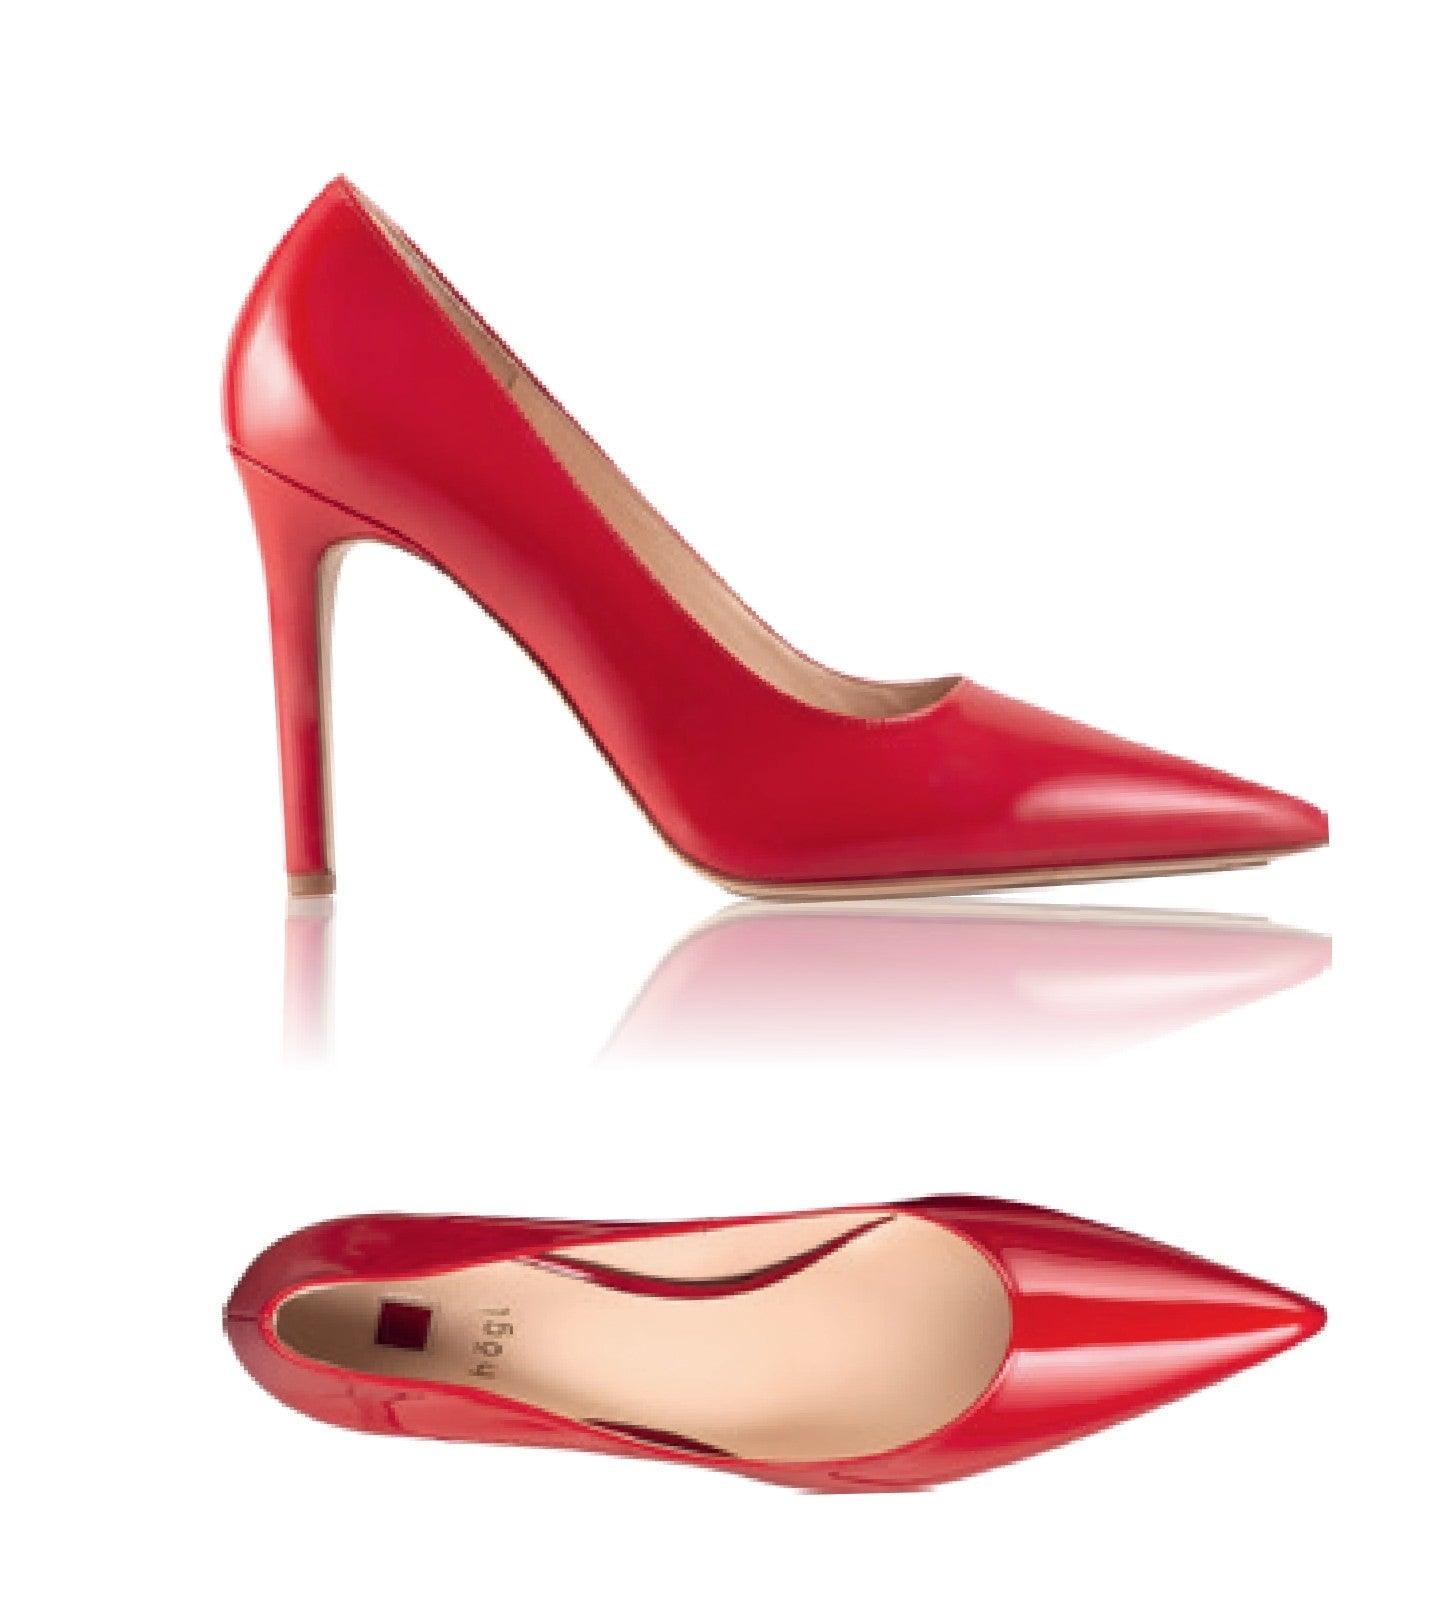 Boulevard 90 | Red Patent Leather - Hogl - Jenny Shoo Bootique